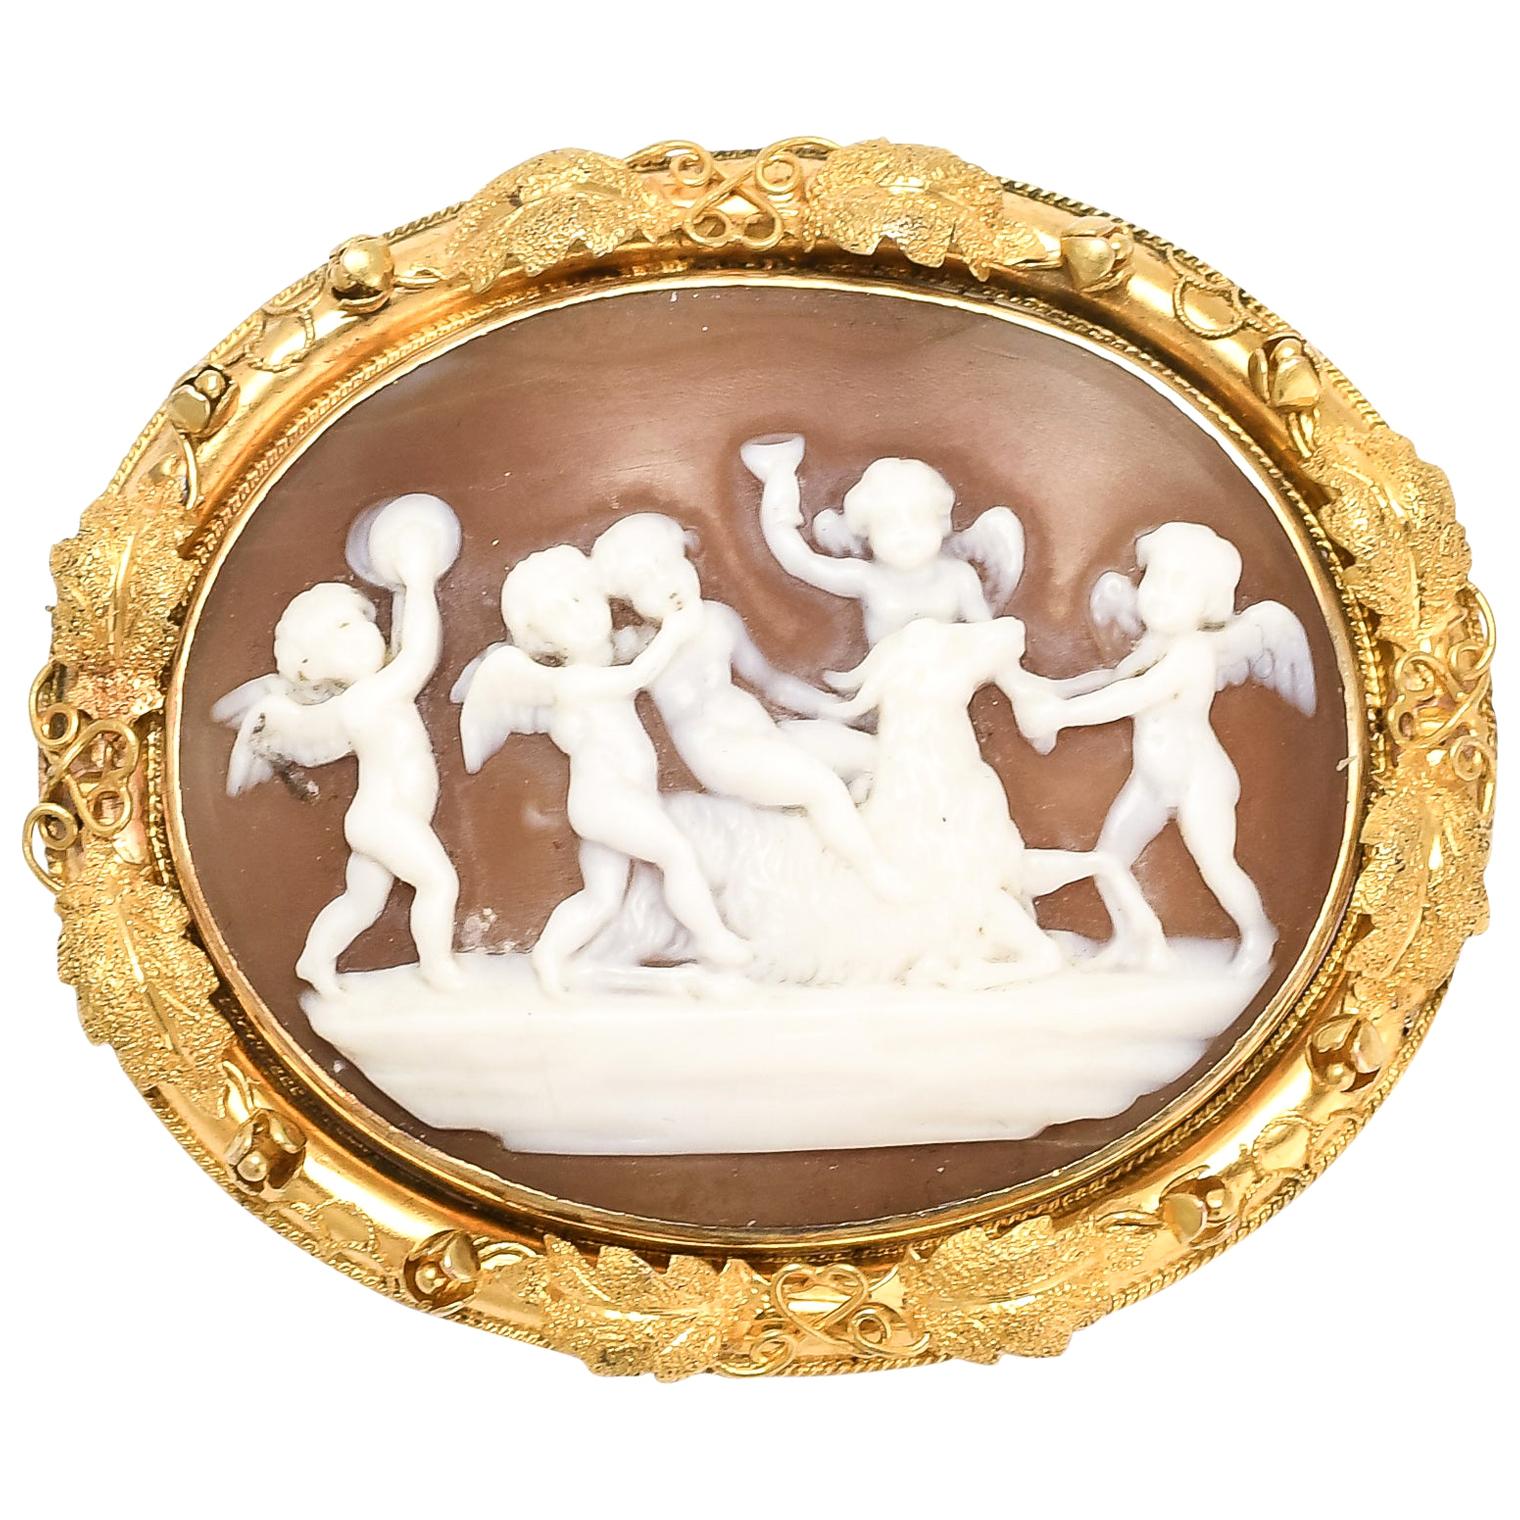 Antique Early Victorian "Bacchanal of Putti" Cameo Brooch